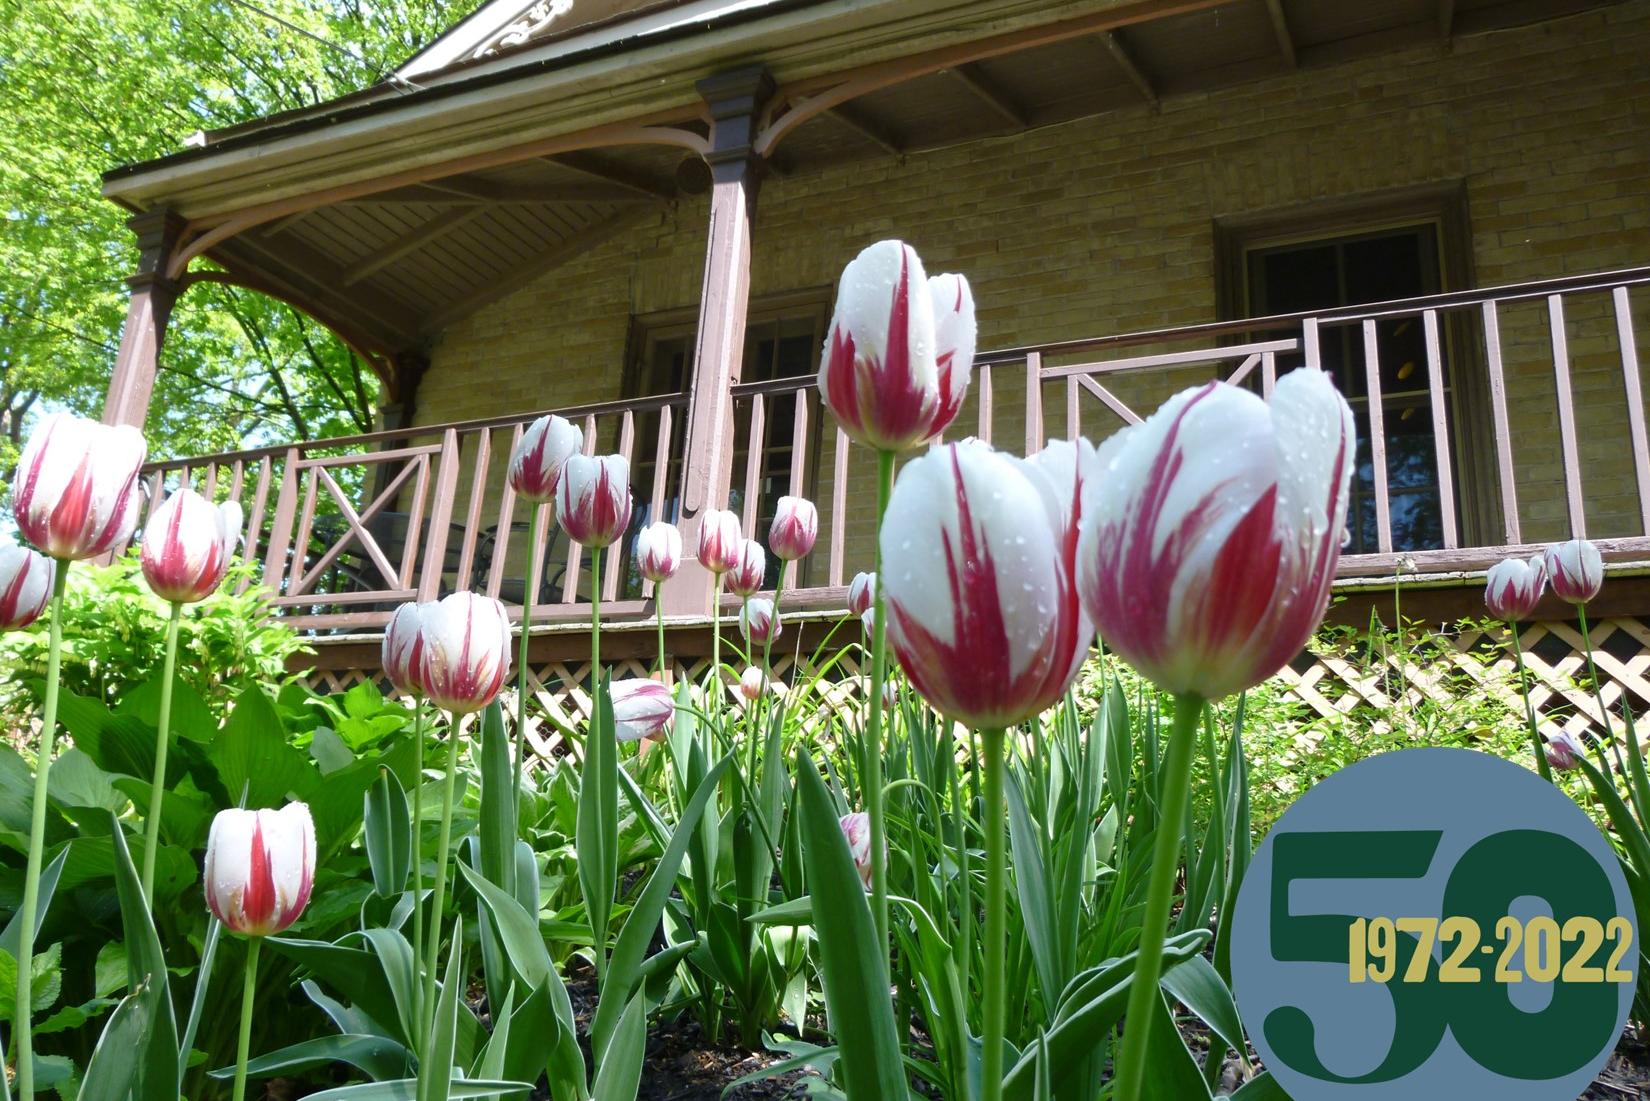 older house with wrap around porch and foreground filled with white and red tulips